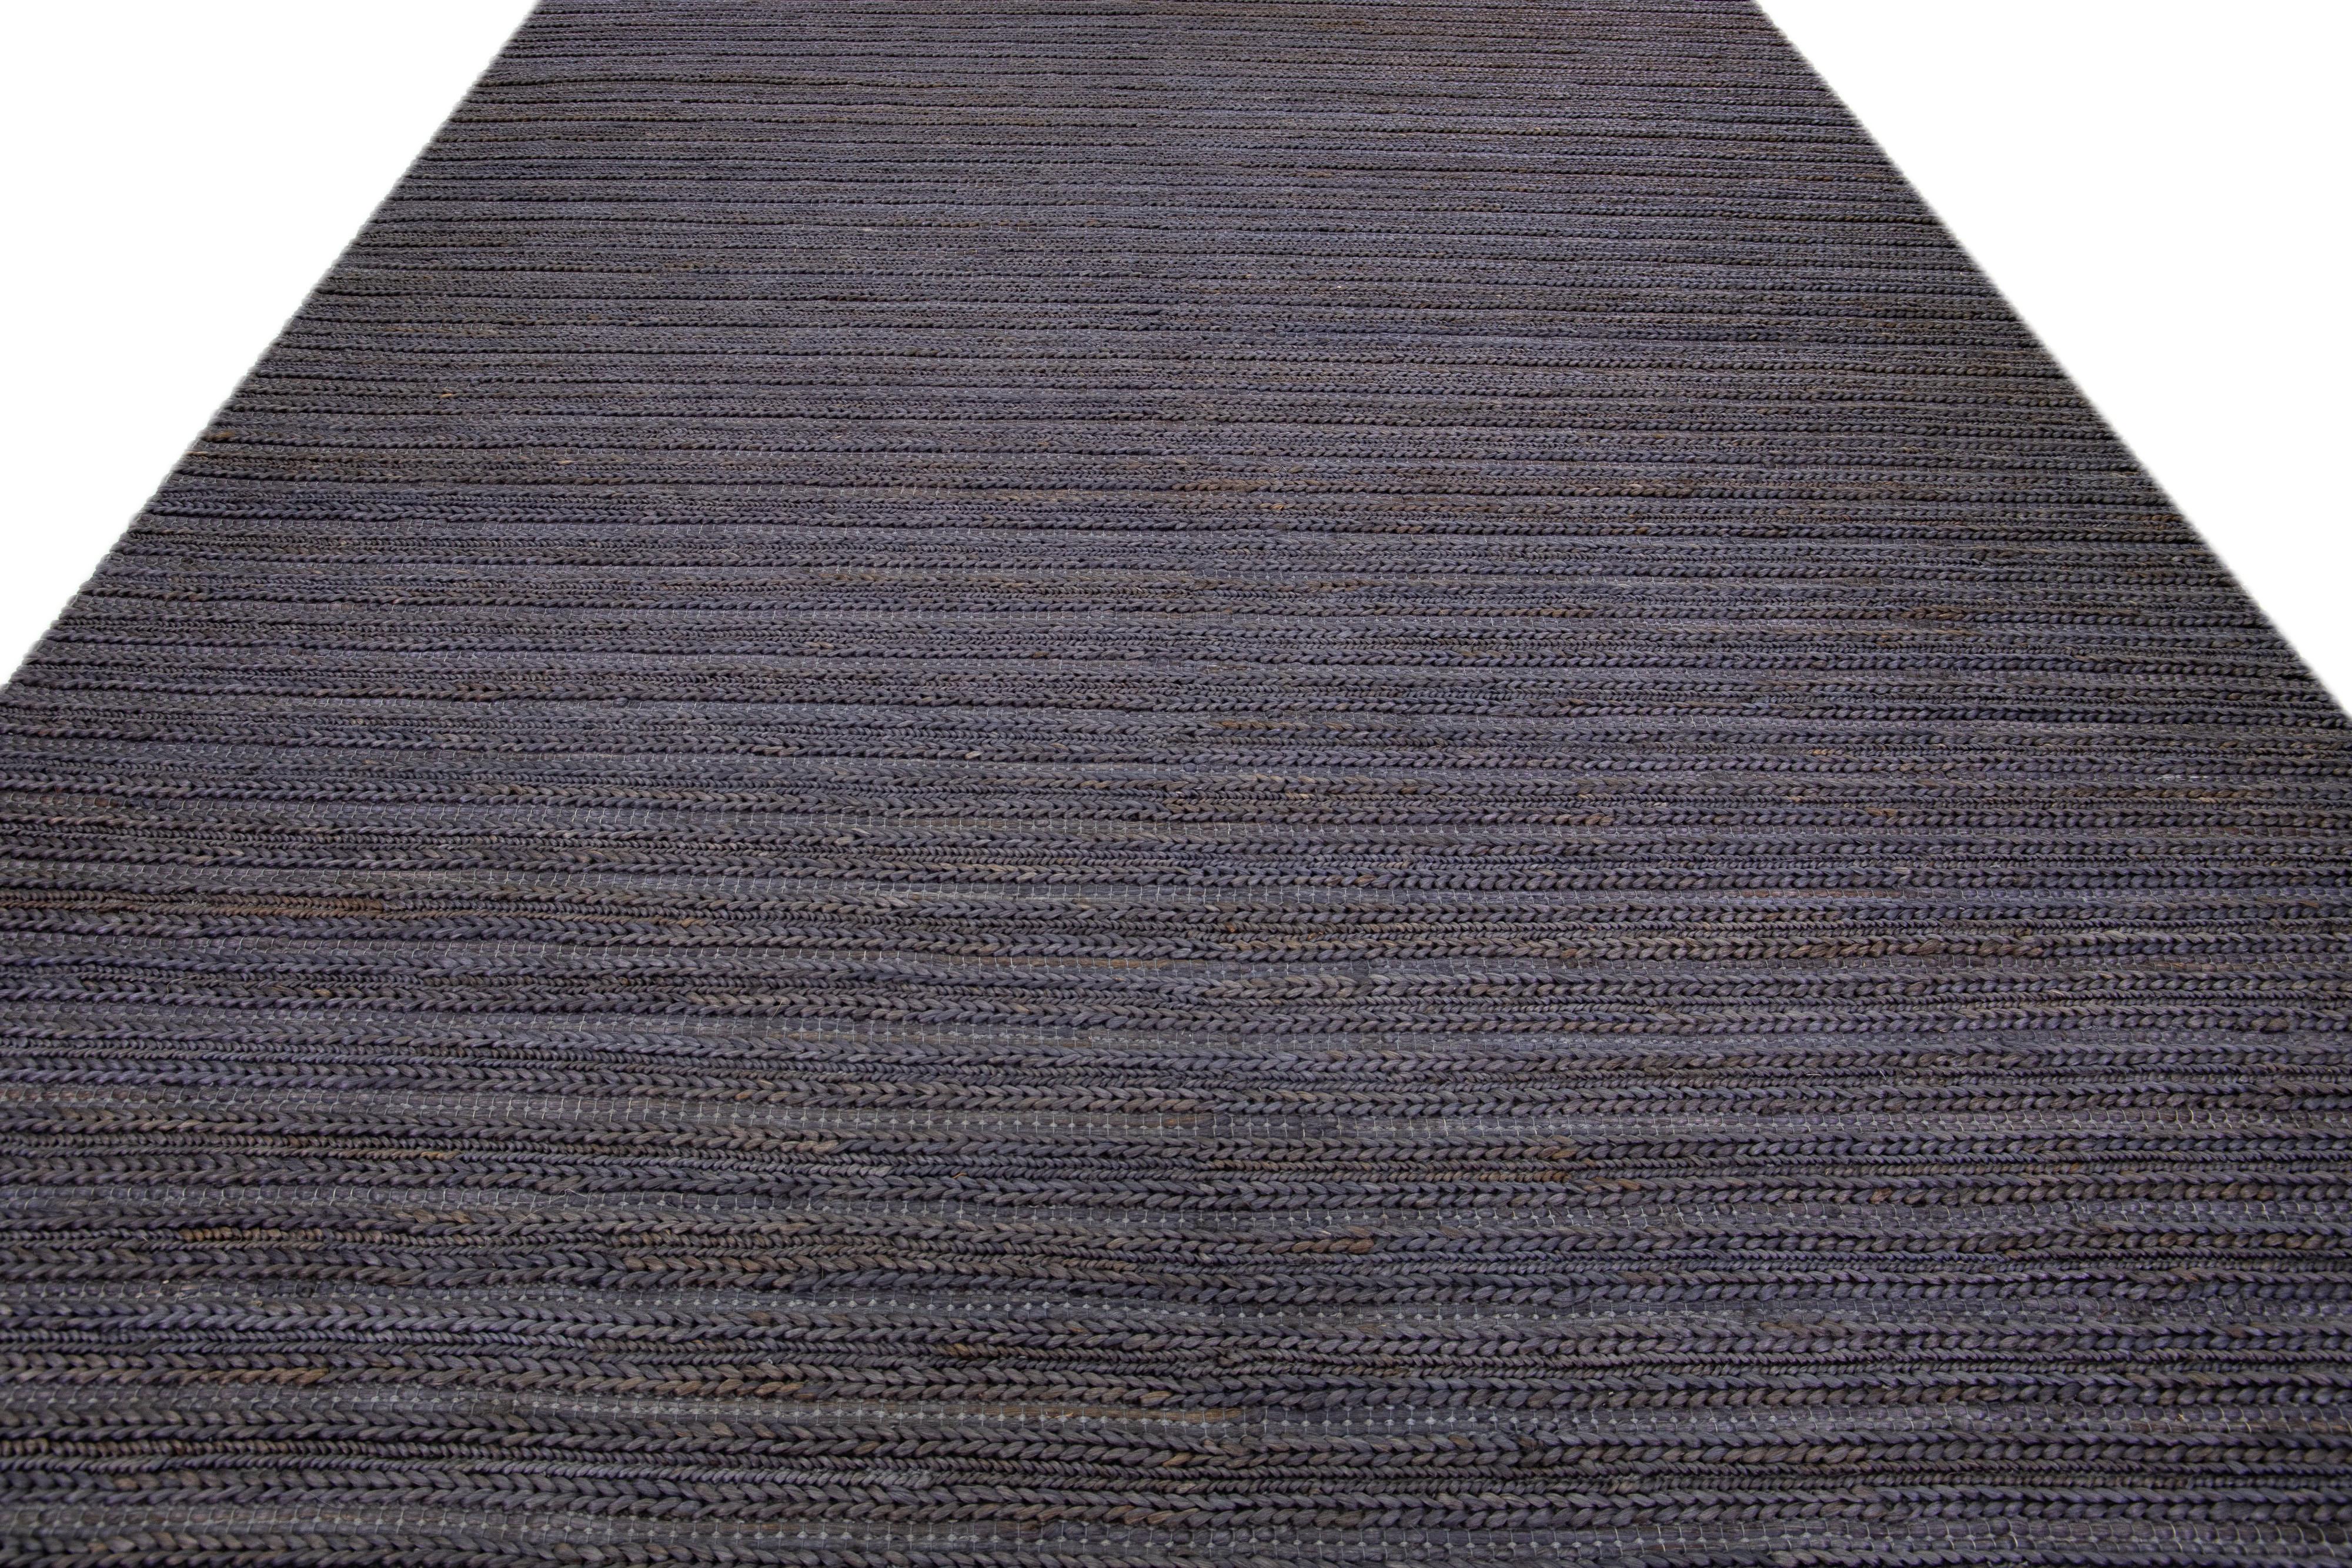 Organic Modern Modern Natural Texture Hand Woven Jute & Cotton Area Rug with Grey-Onyx Color For Sale